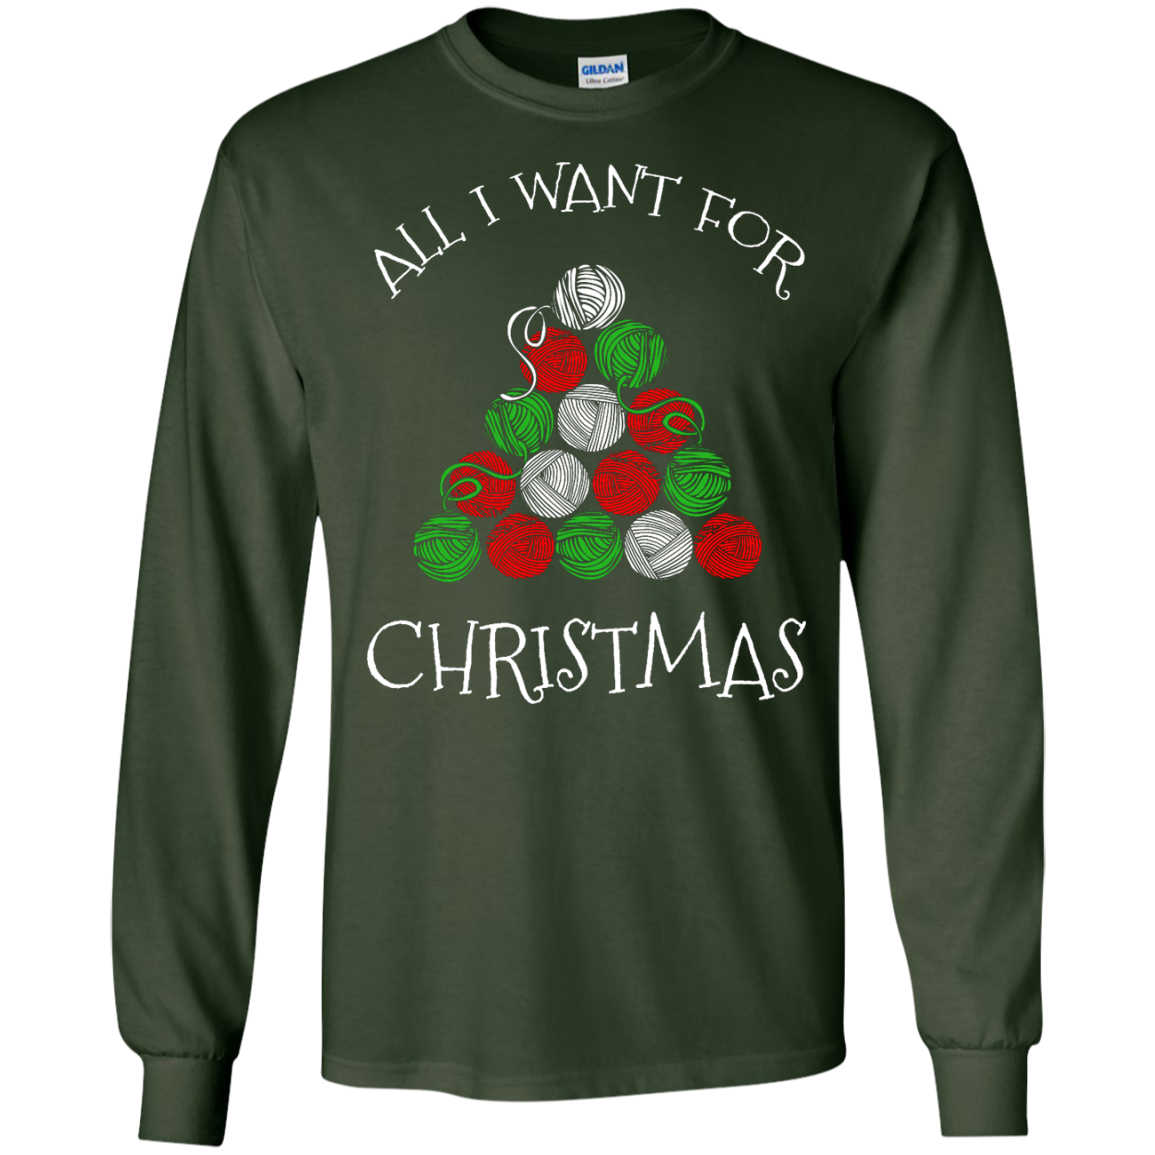 All I Want for Christmas is Yarn LS Ultra Cotton T-shirt